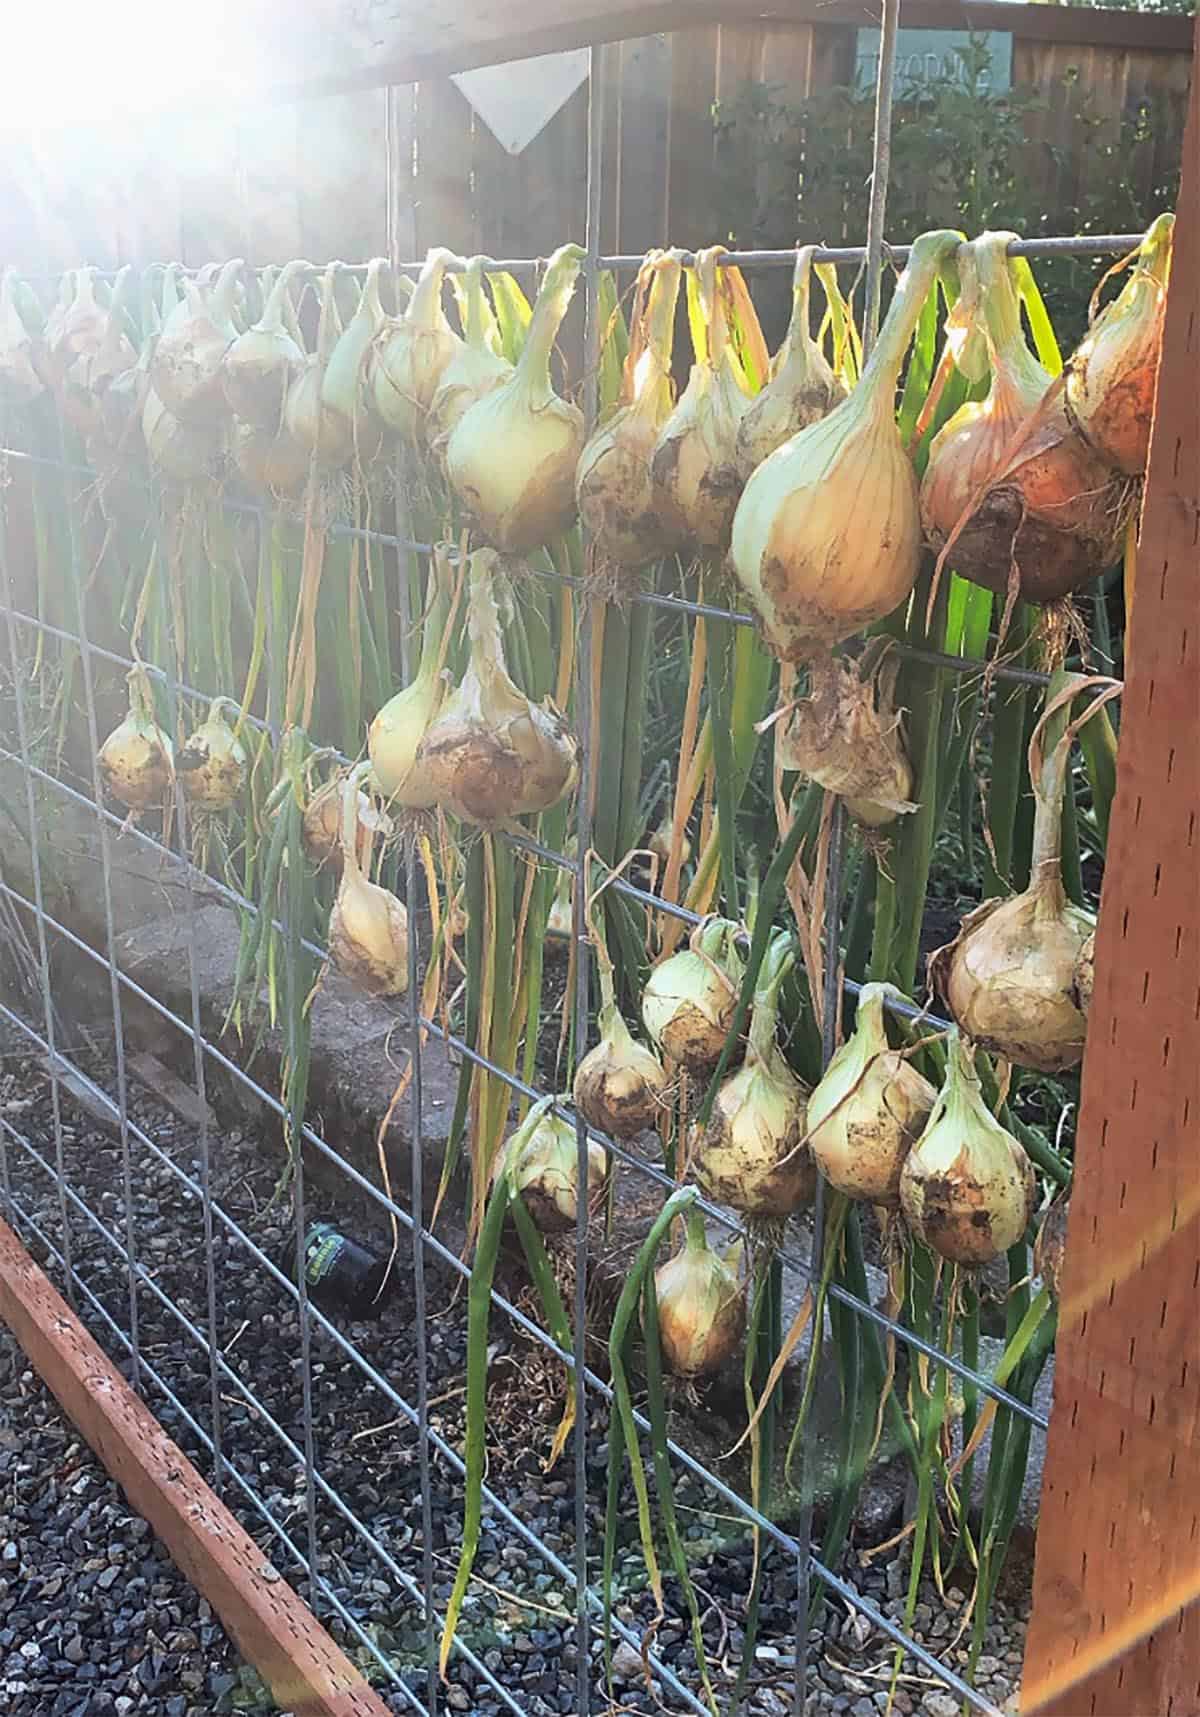 Walla Walla onions from a home garden hanging on a fence to cure. 